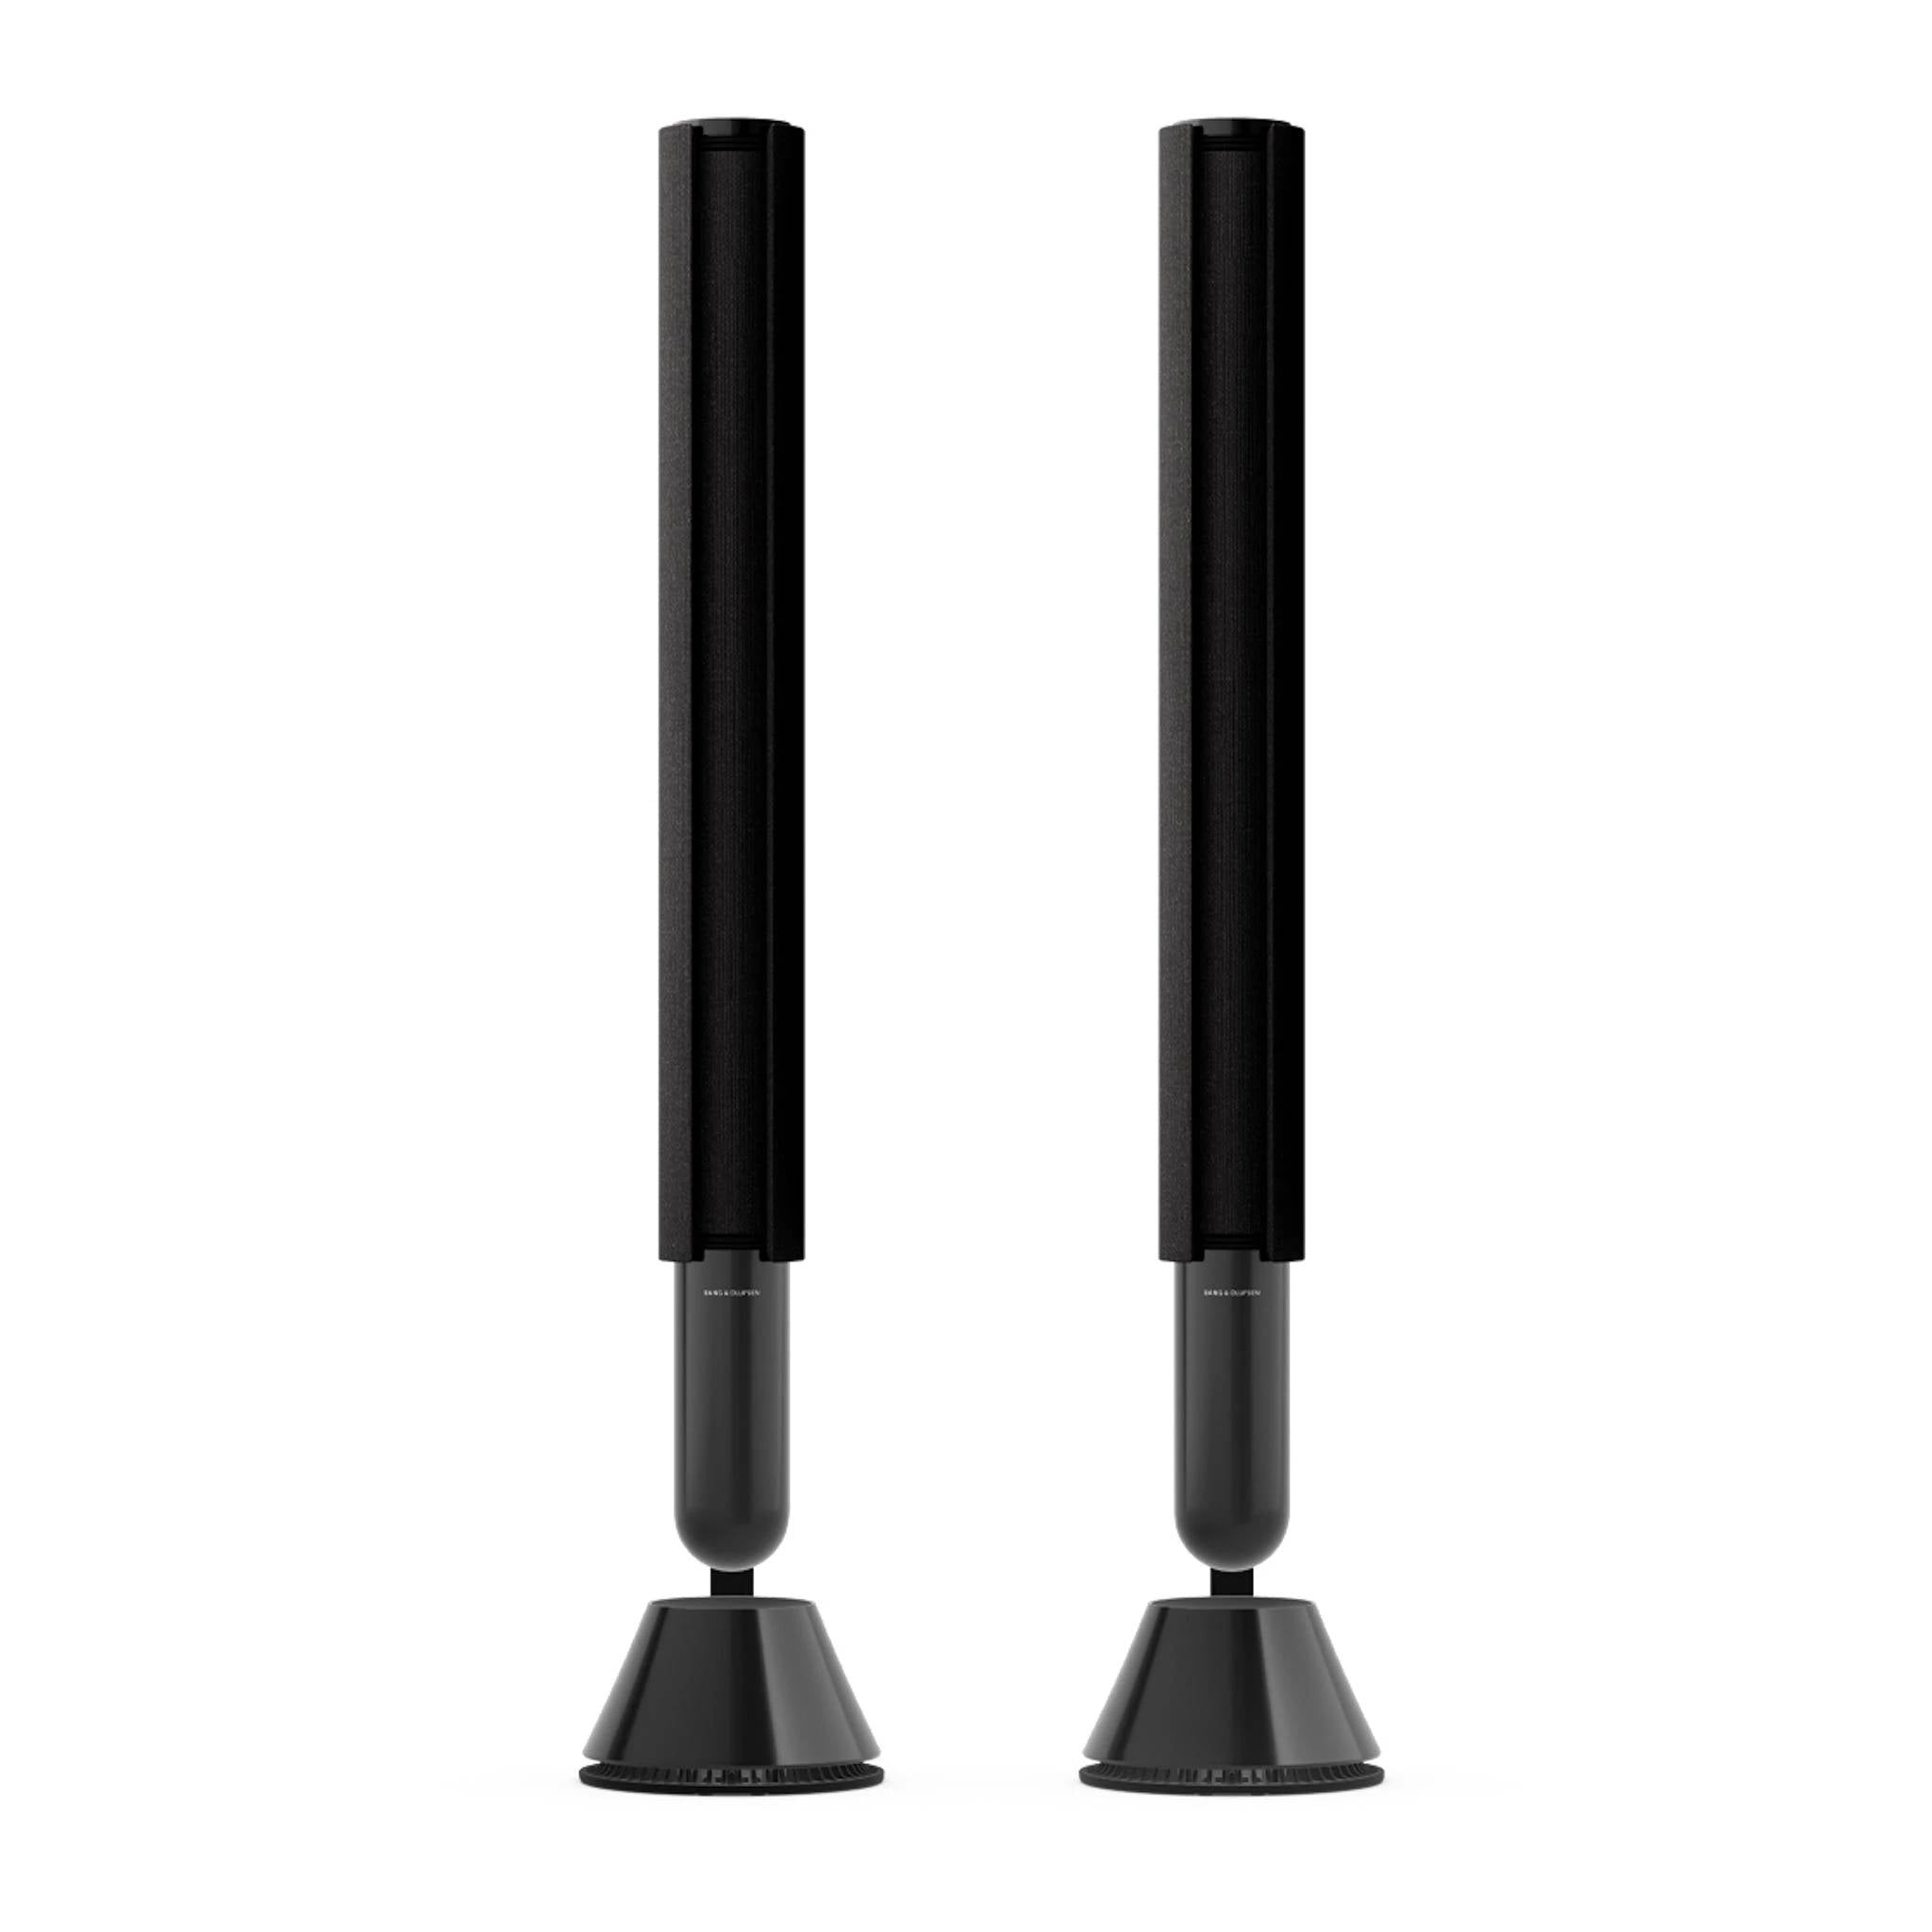 Bang & Olufsen Beolab 28 Hi-res Wireless Stereo Speakers Pair